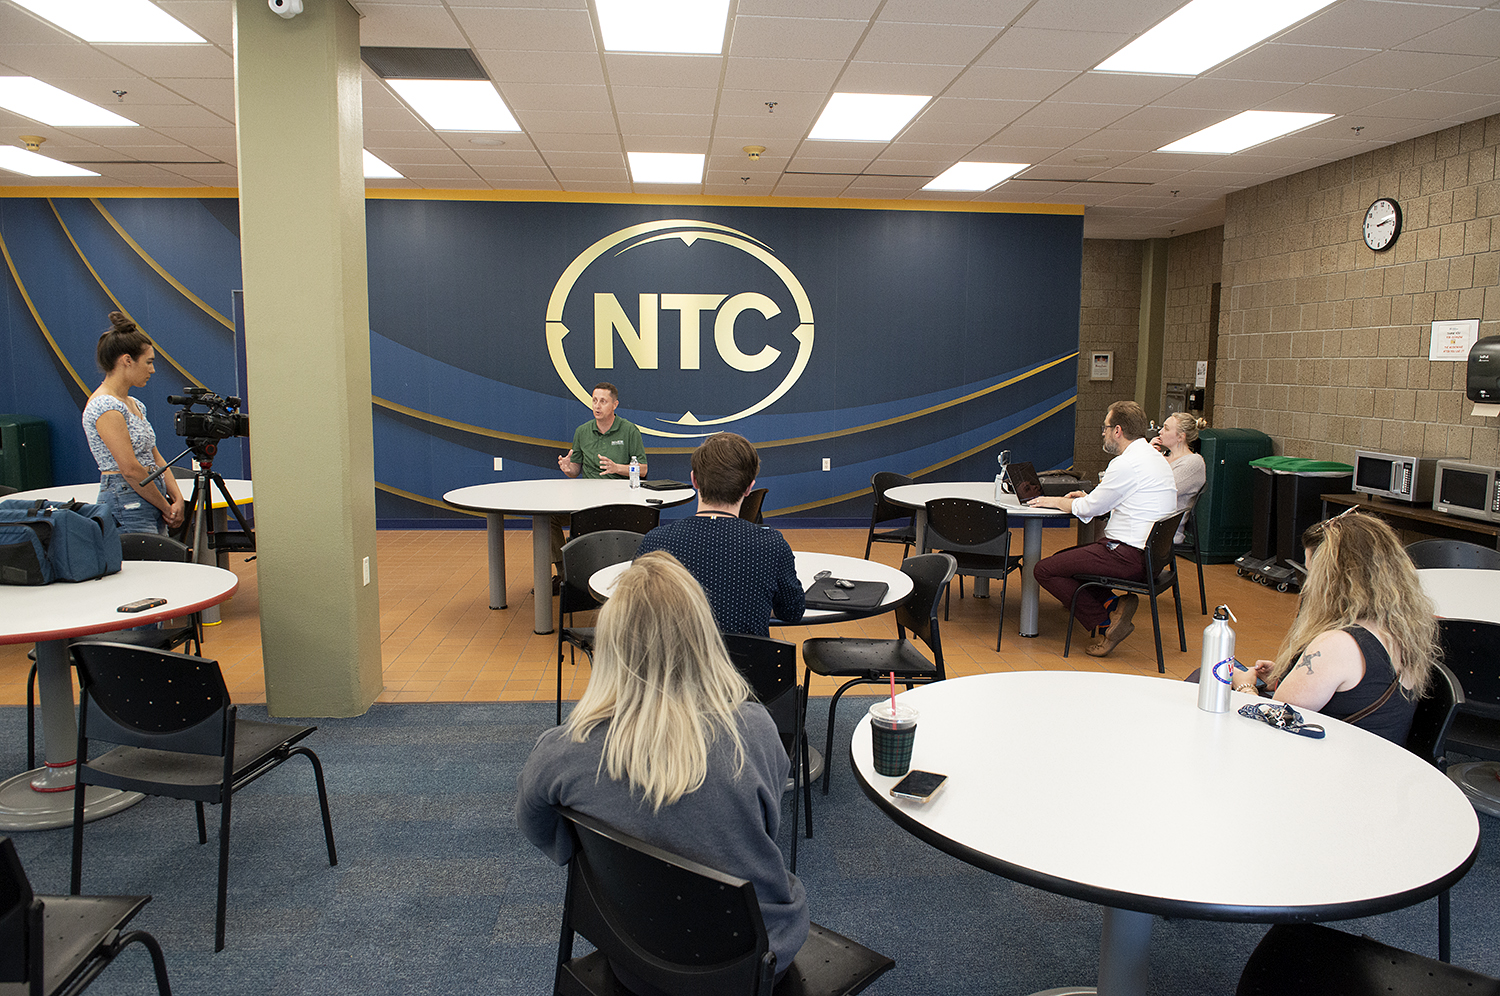 Dr. John Hoffman speaks at a press conference at NTC